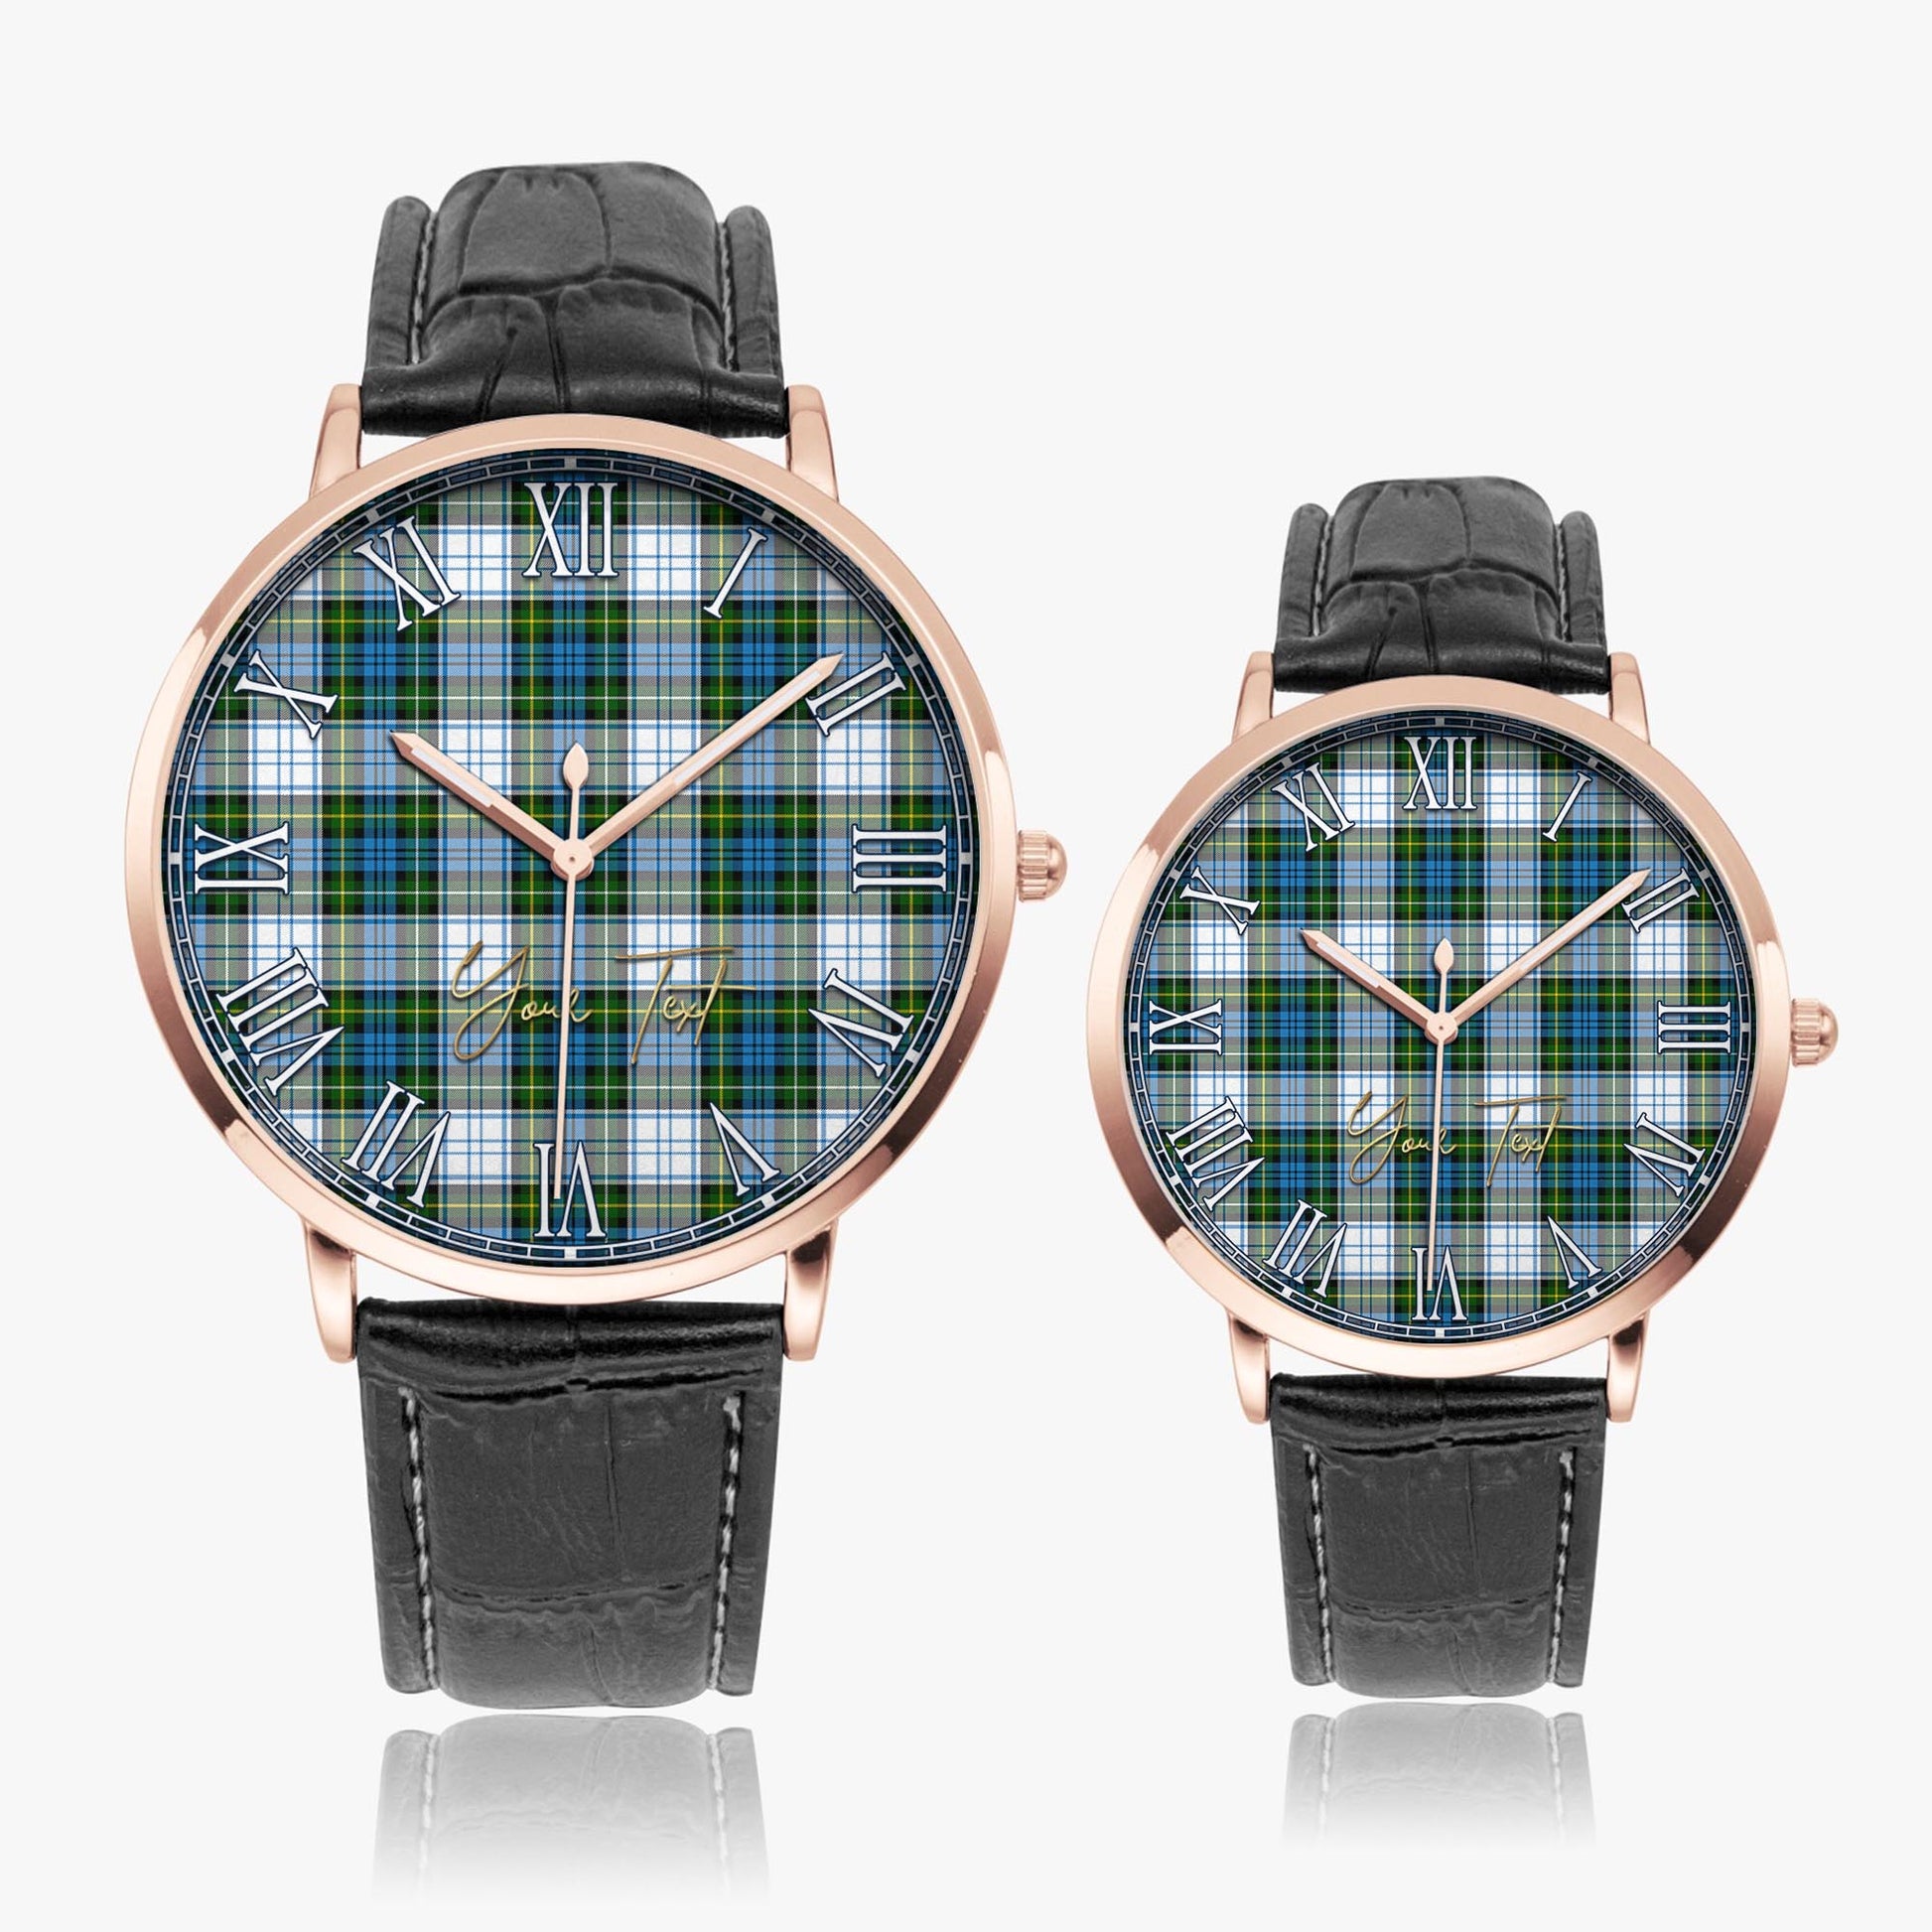 Campbell Dress Tartan Personalized Your Text Leather Trap Quartz Watch Ultra Thin Rose Gold Case With Black Leather Strap - Tartanvibesclothing